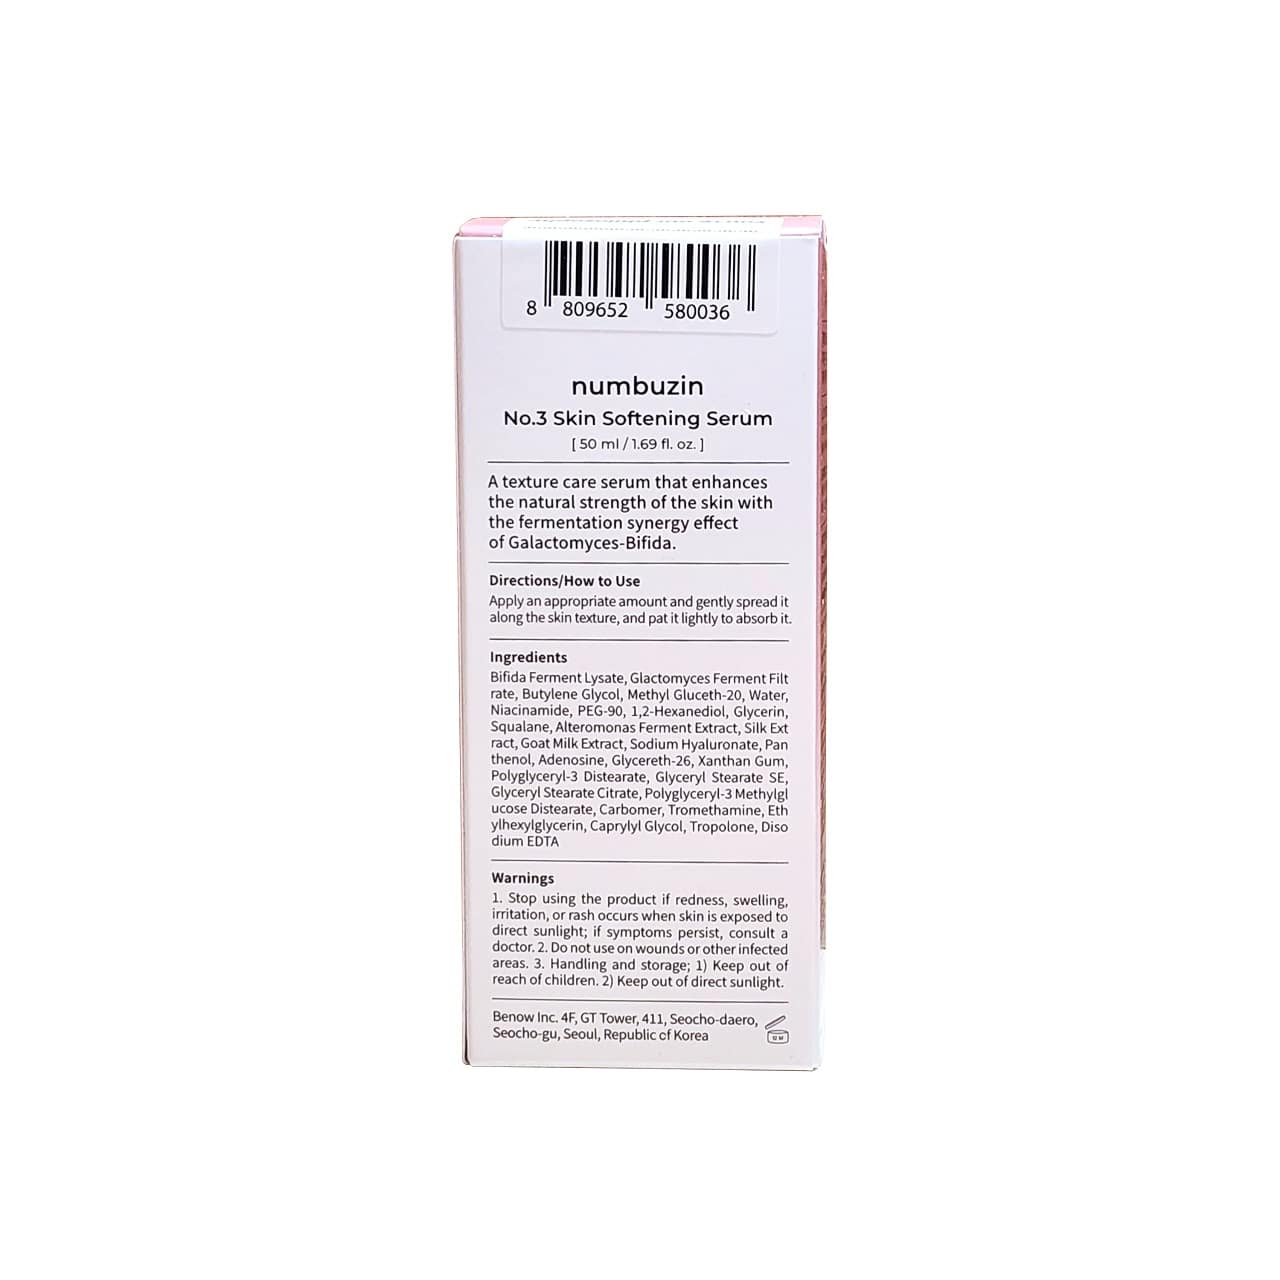 Description, Directions, Ingredients, Warnings for numbuzin No. 3 Skin Softening Serum (50 mL) in English